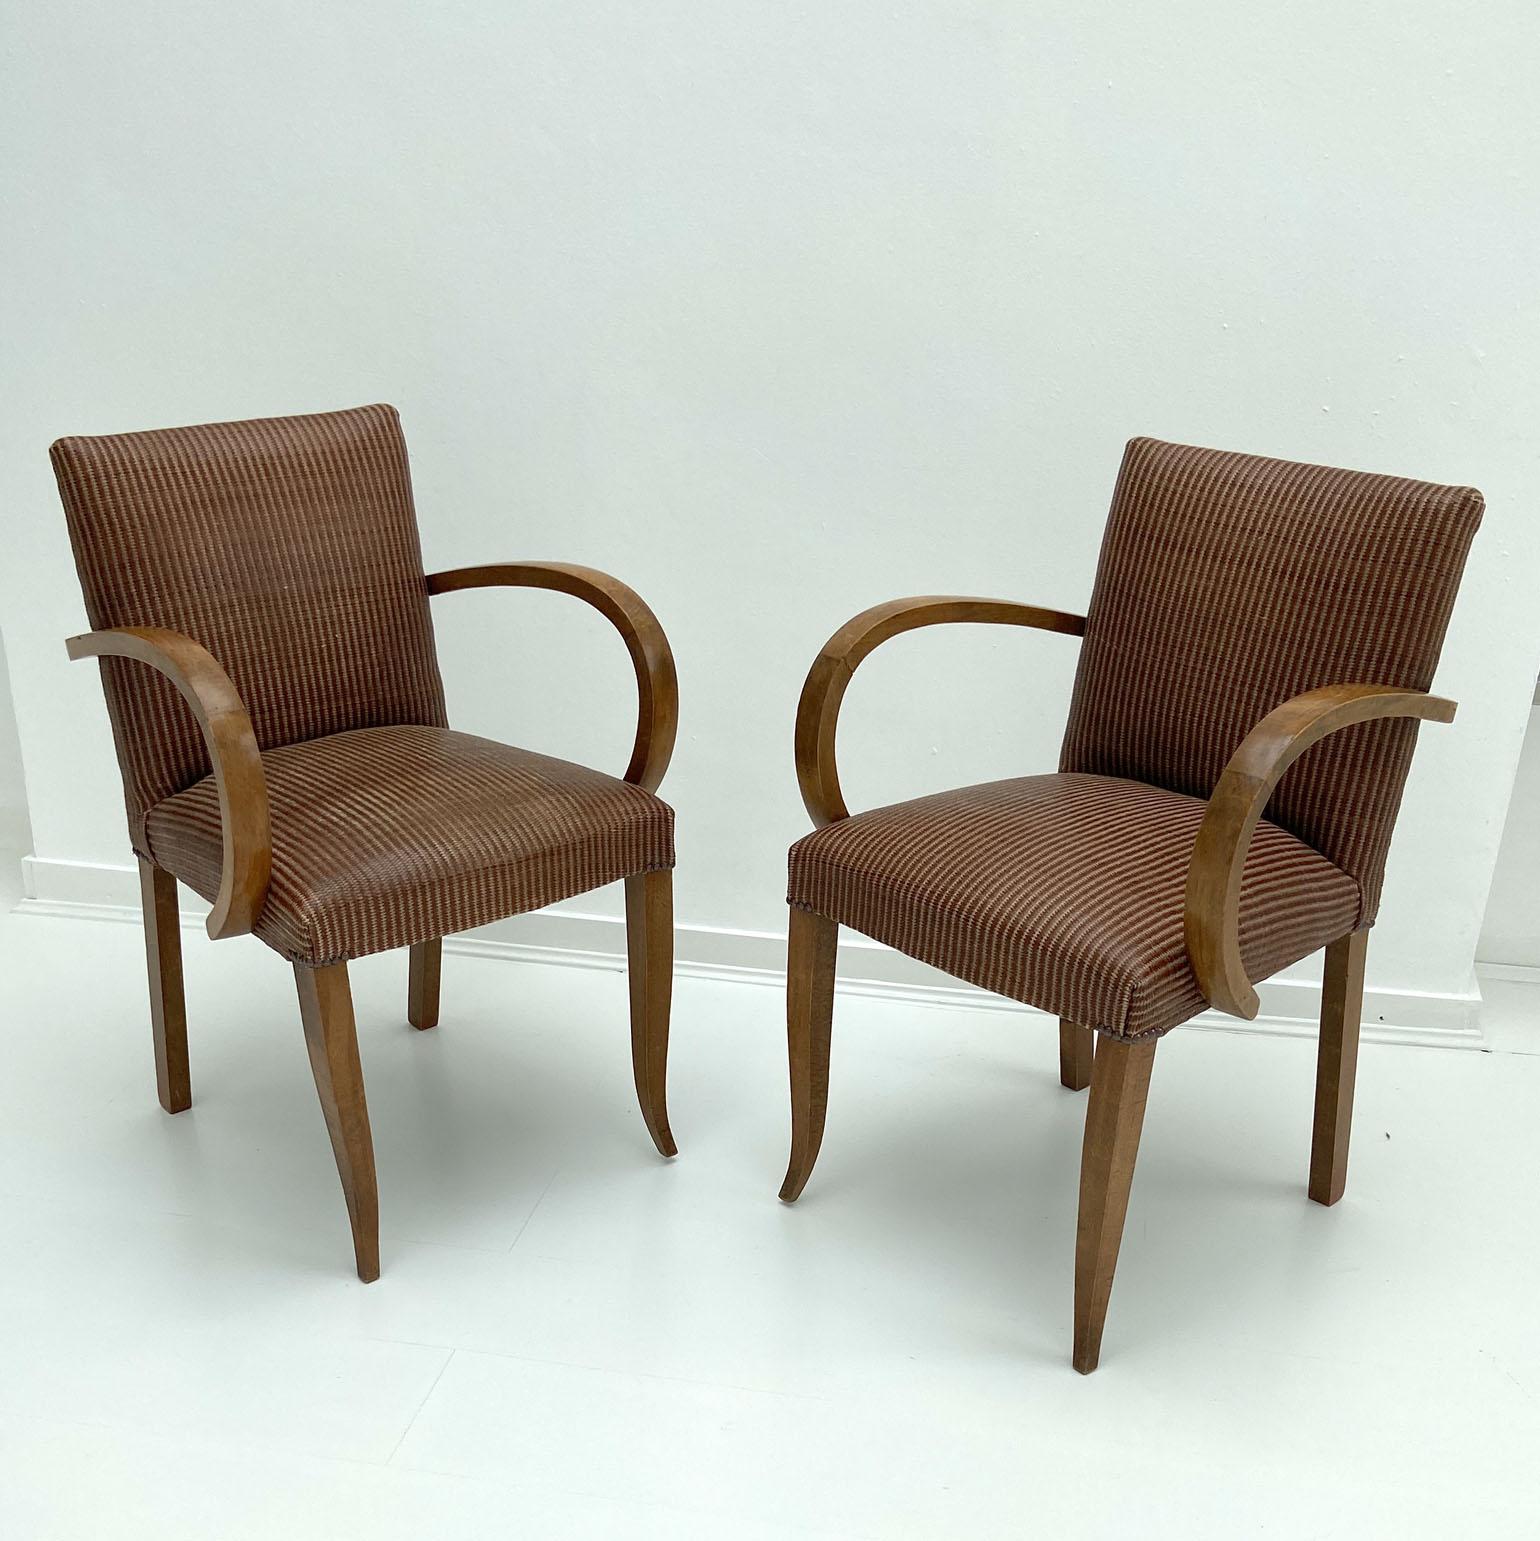 Art Deco Pair of Modernist Bridge Chairs or Armchairs, French, 1930s For Sale